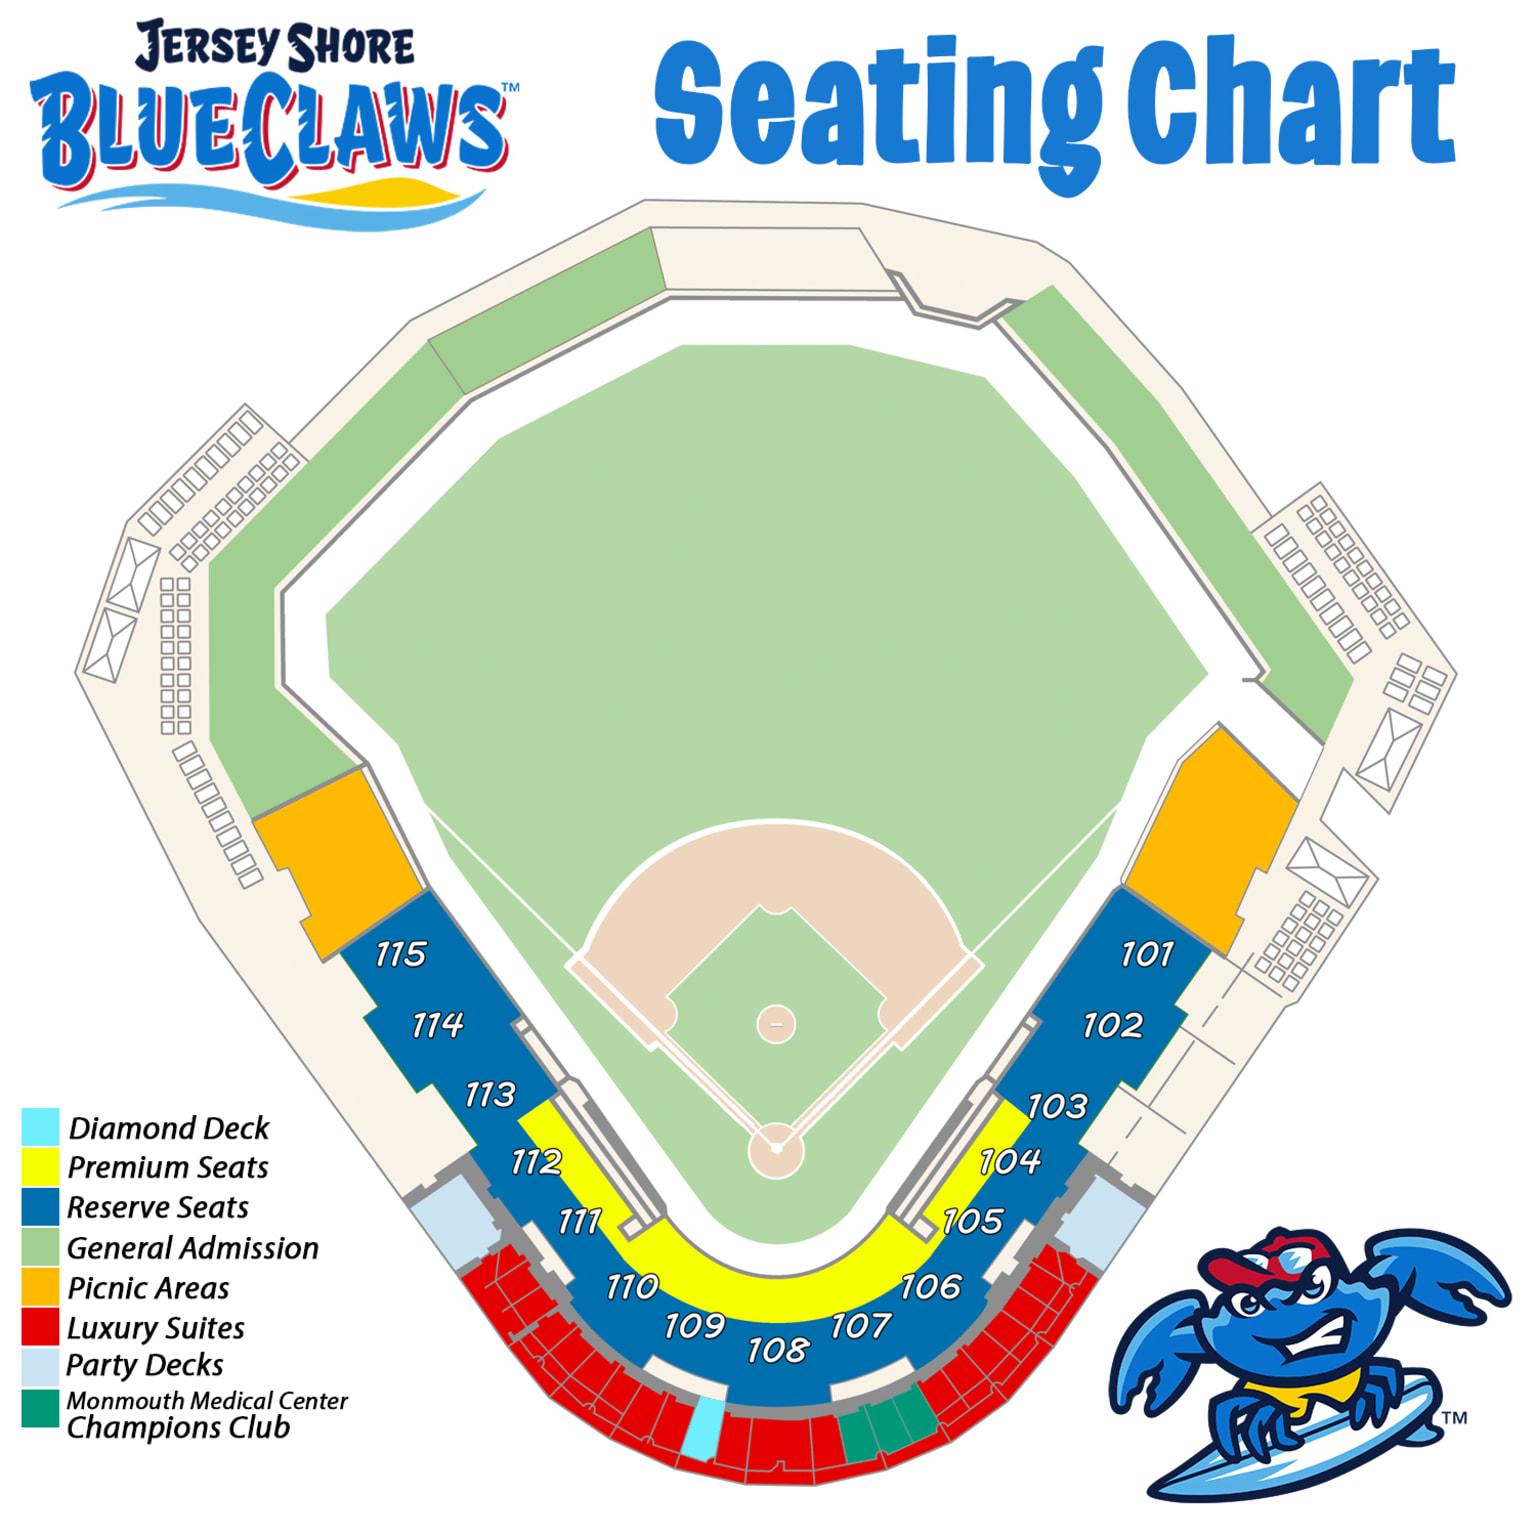 Seating Chart BlueClaws